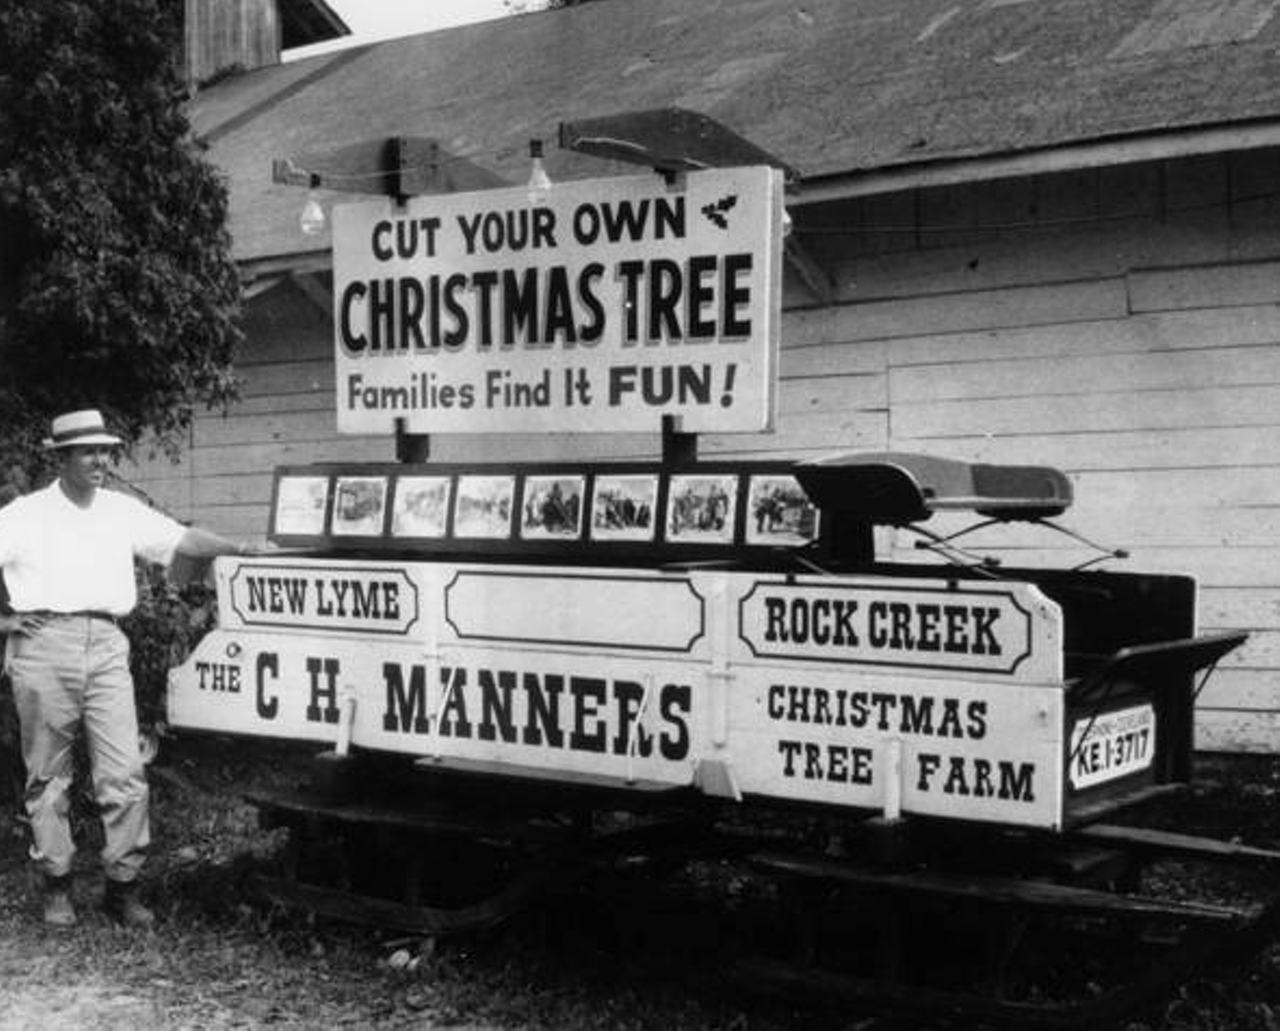 1962: A man stands next to an old bobsled, which now serves as a stand for a Christmas tree farm, at the county fair.